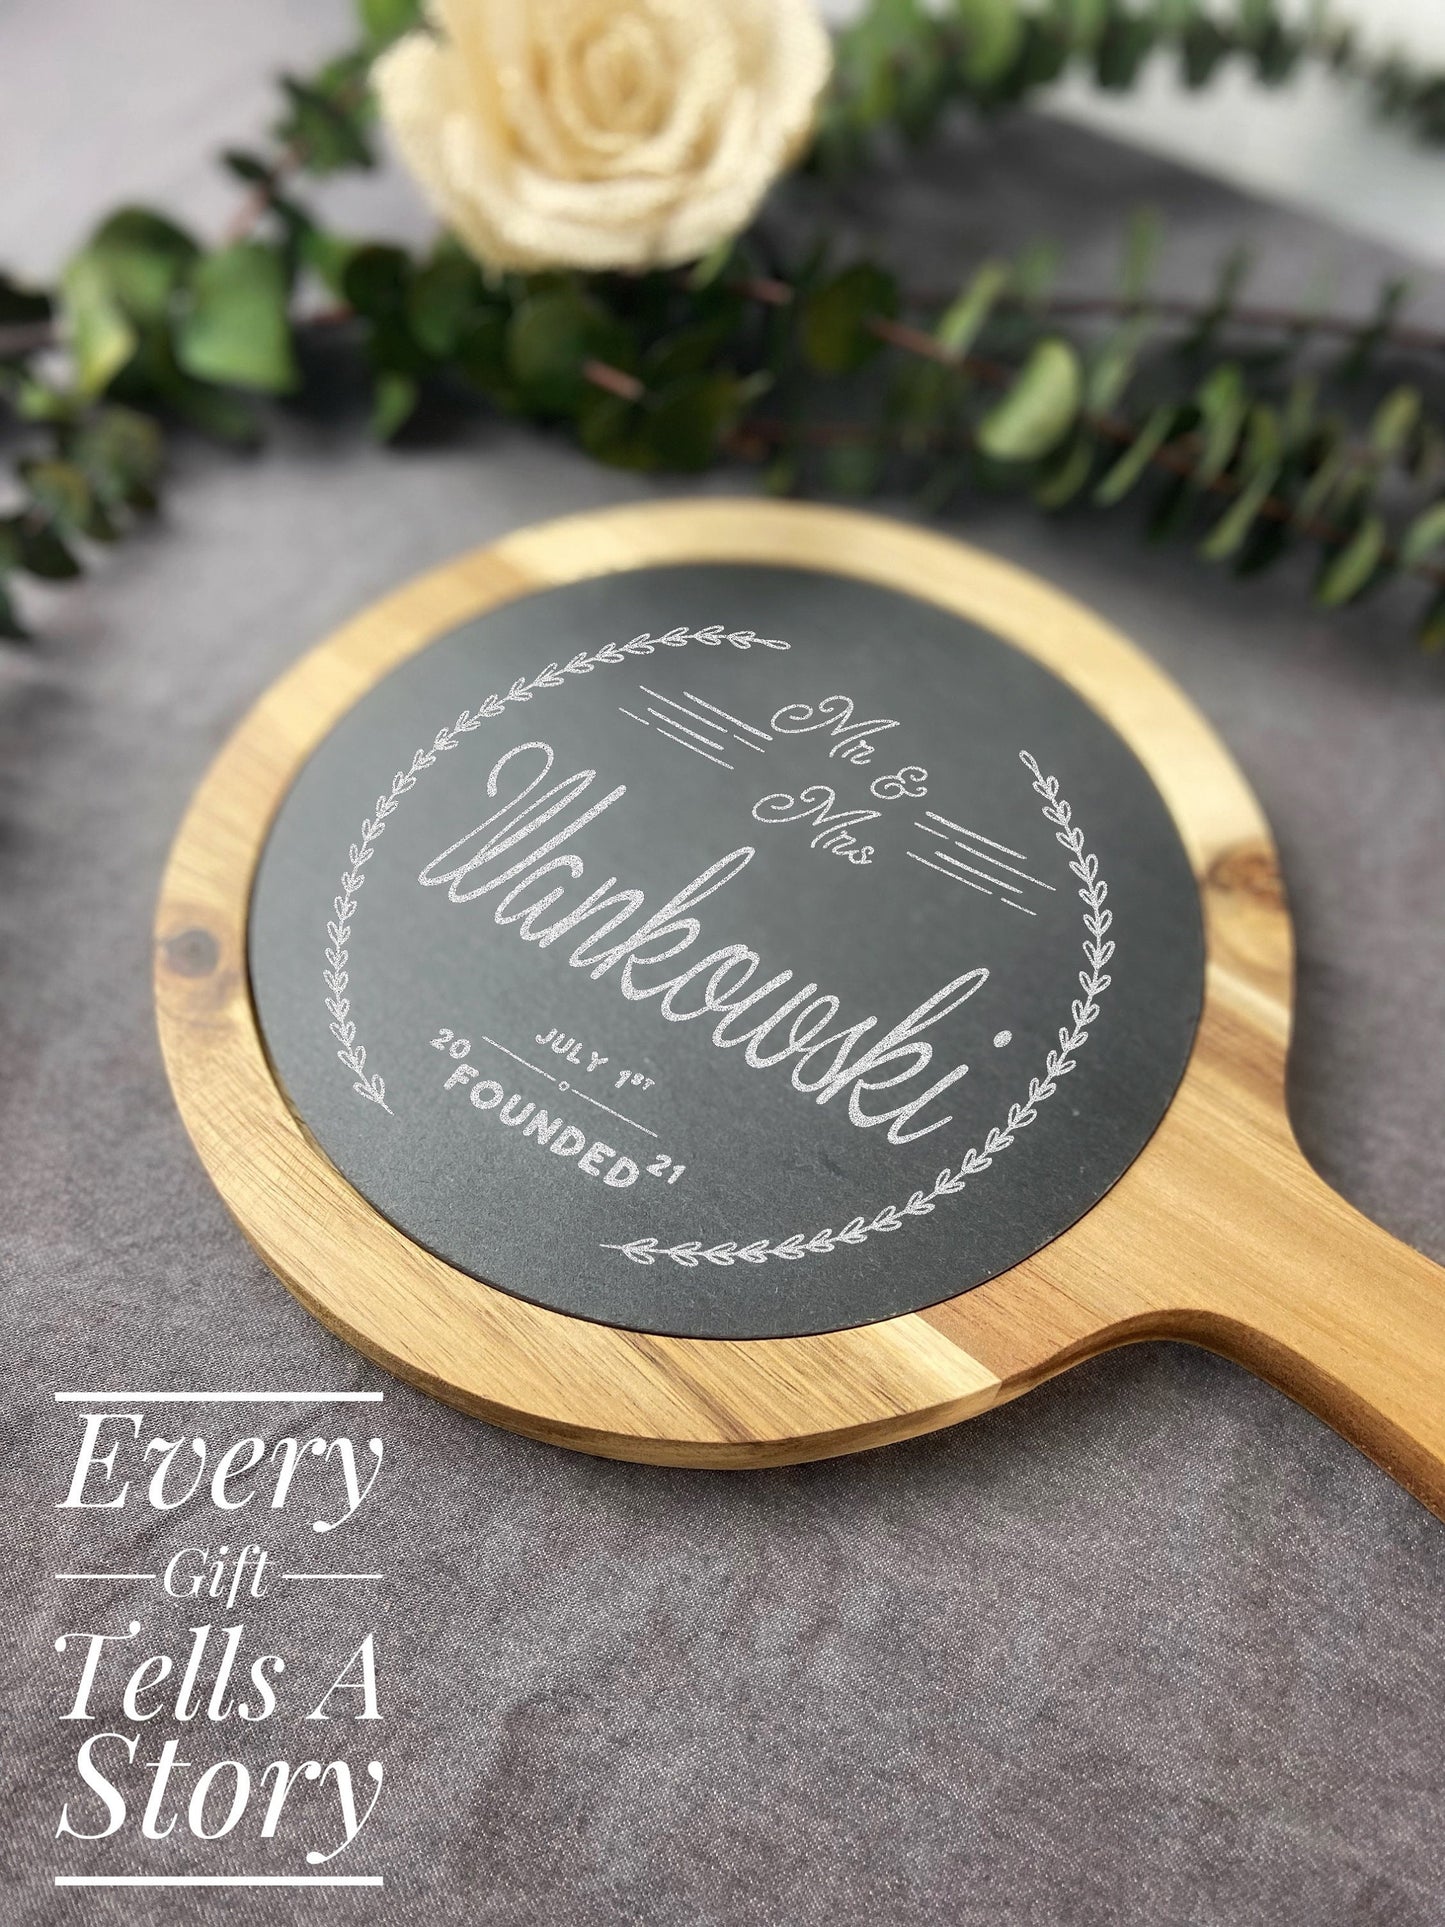 Personalized Cheese Board, Charcuterie Board, Slate Cheese Gift, House Warming Gift, Anniversary, Wedding Gift for Couple